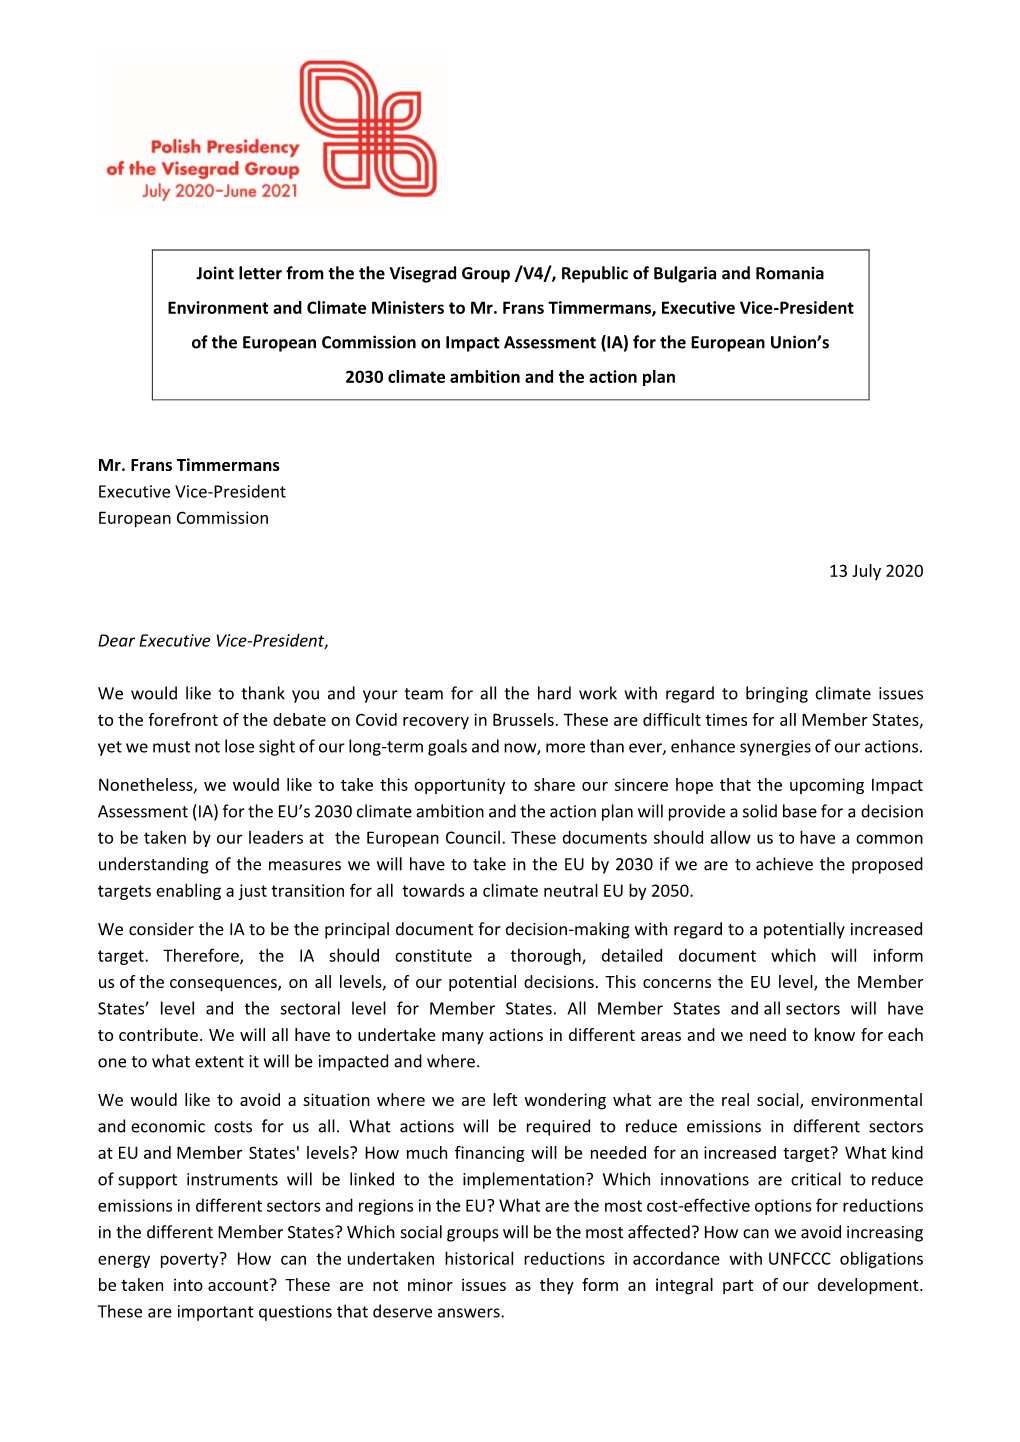 Joint Letter from the the Visegrad Group /V4/, Republic of Bulgaria and Romania Environment and Climate Ministers to Mr